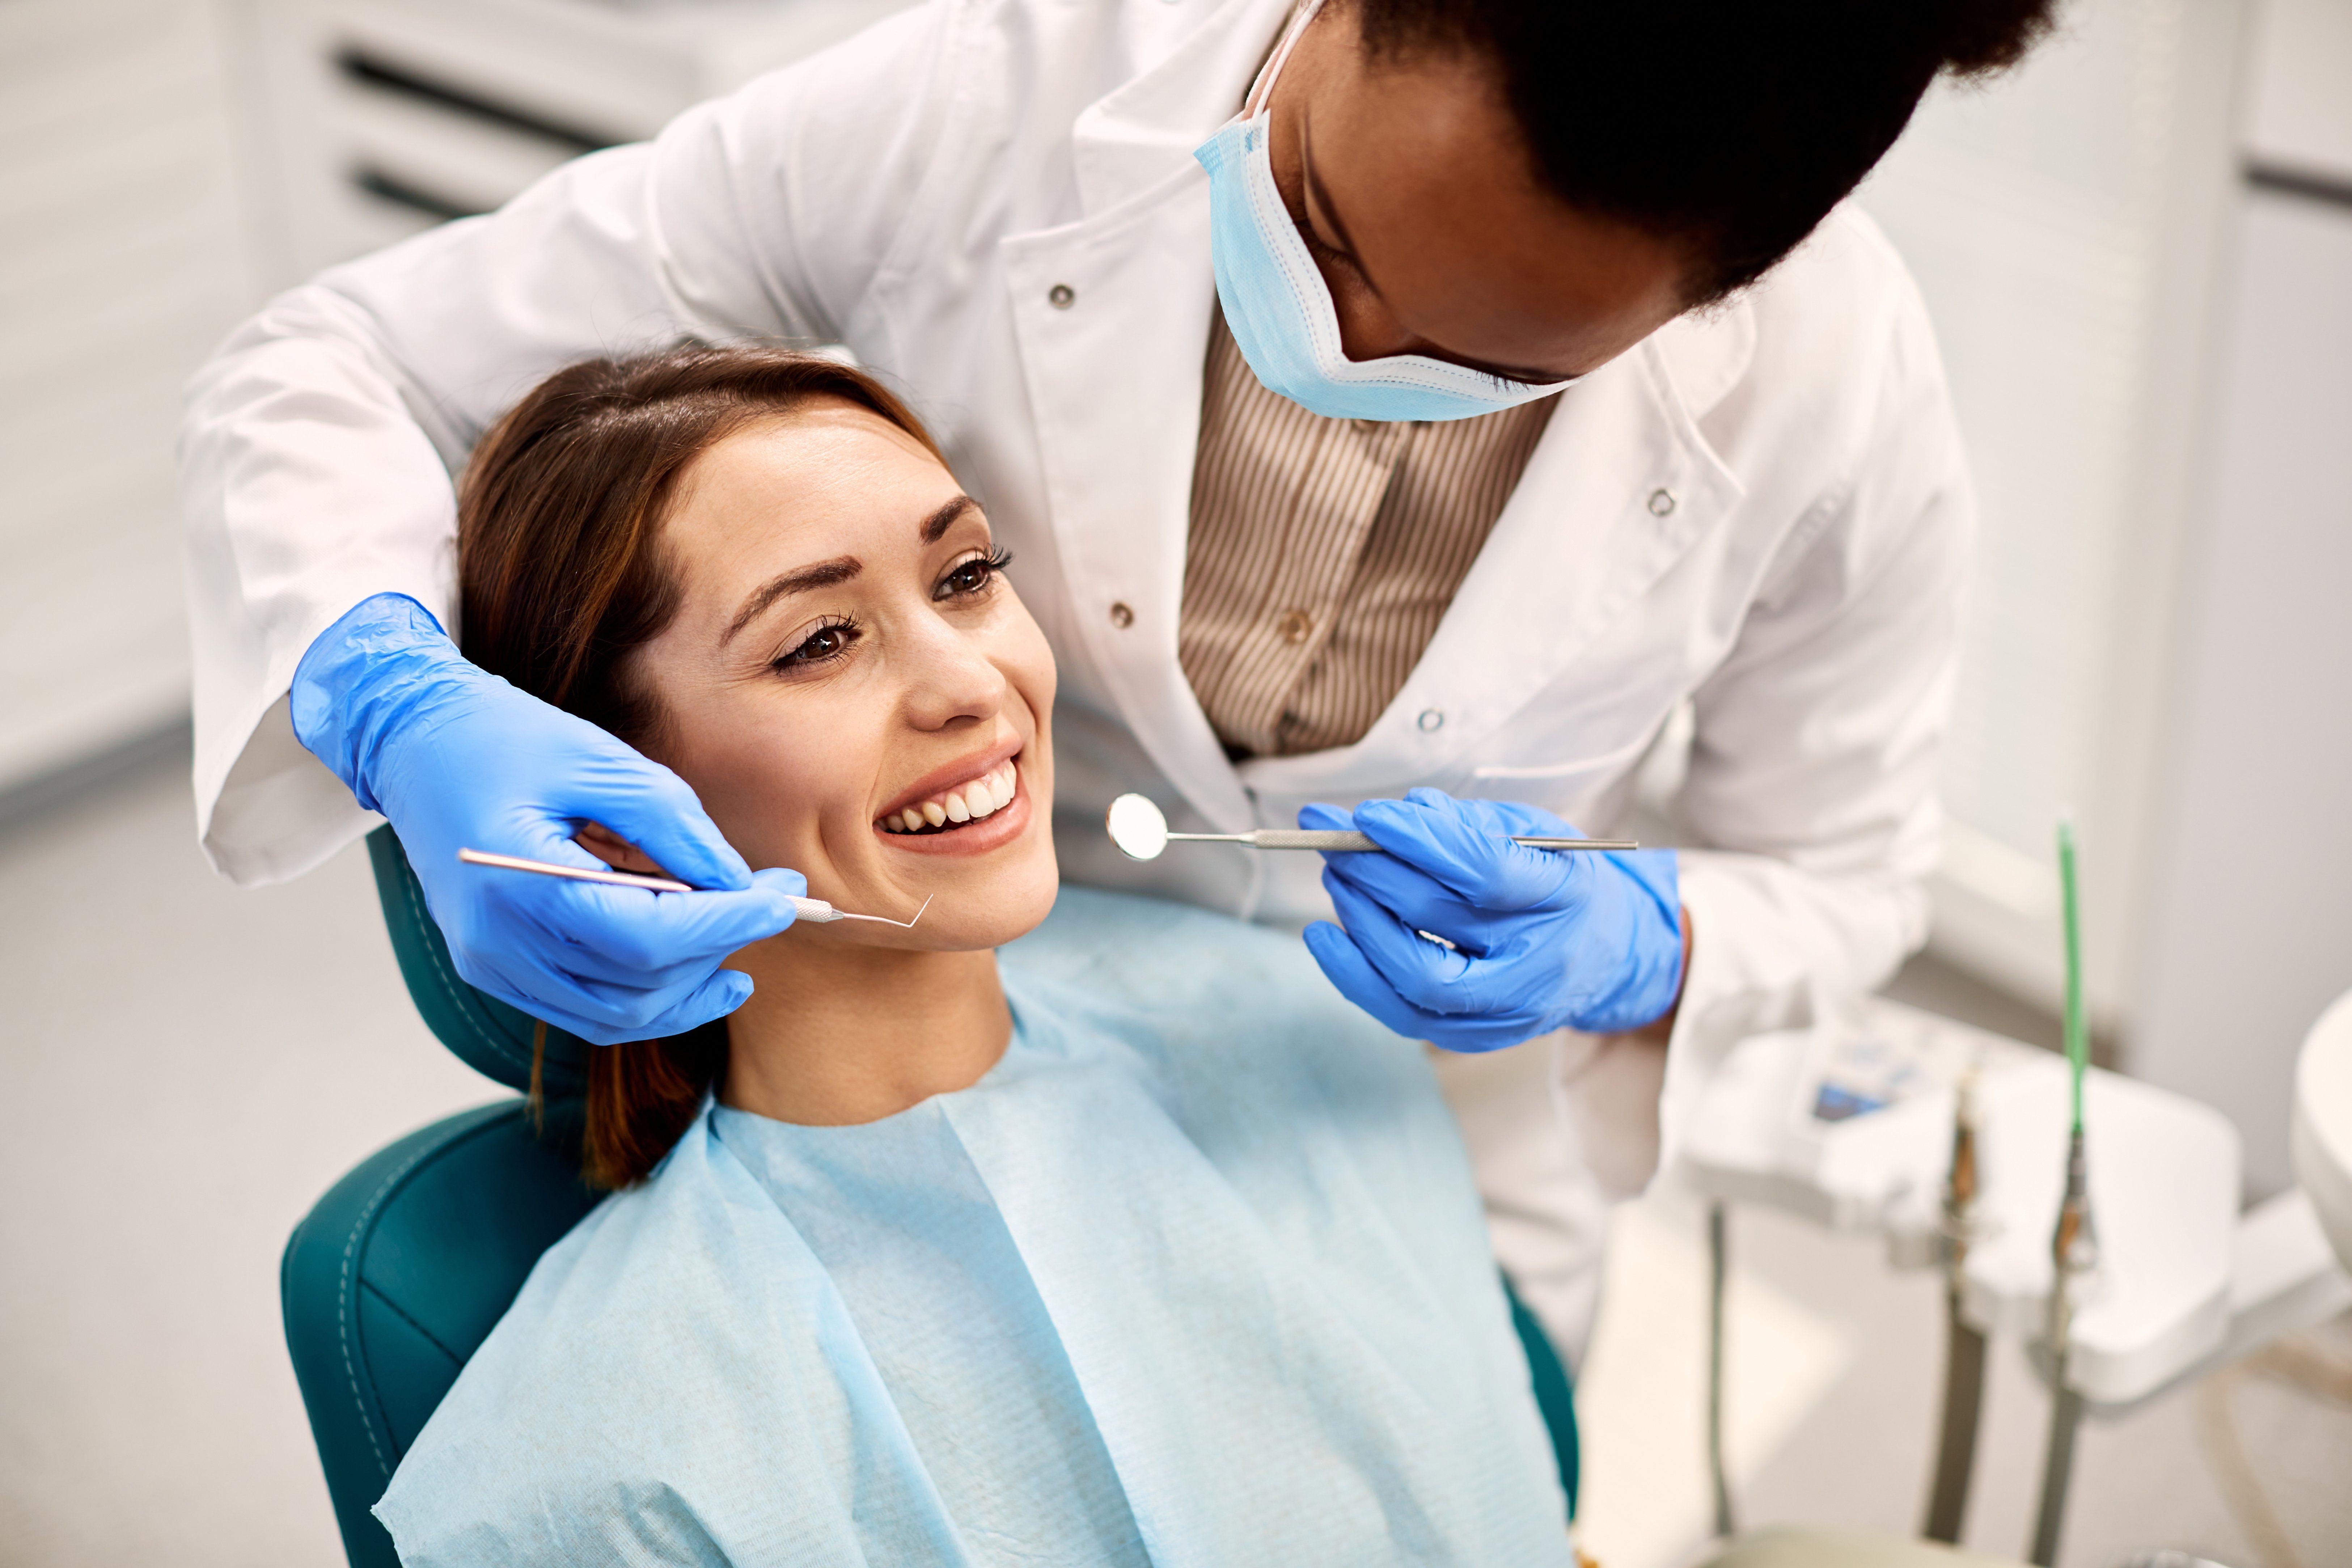 What Happens During a Dental Exam?